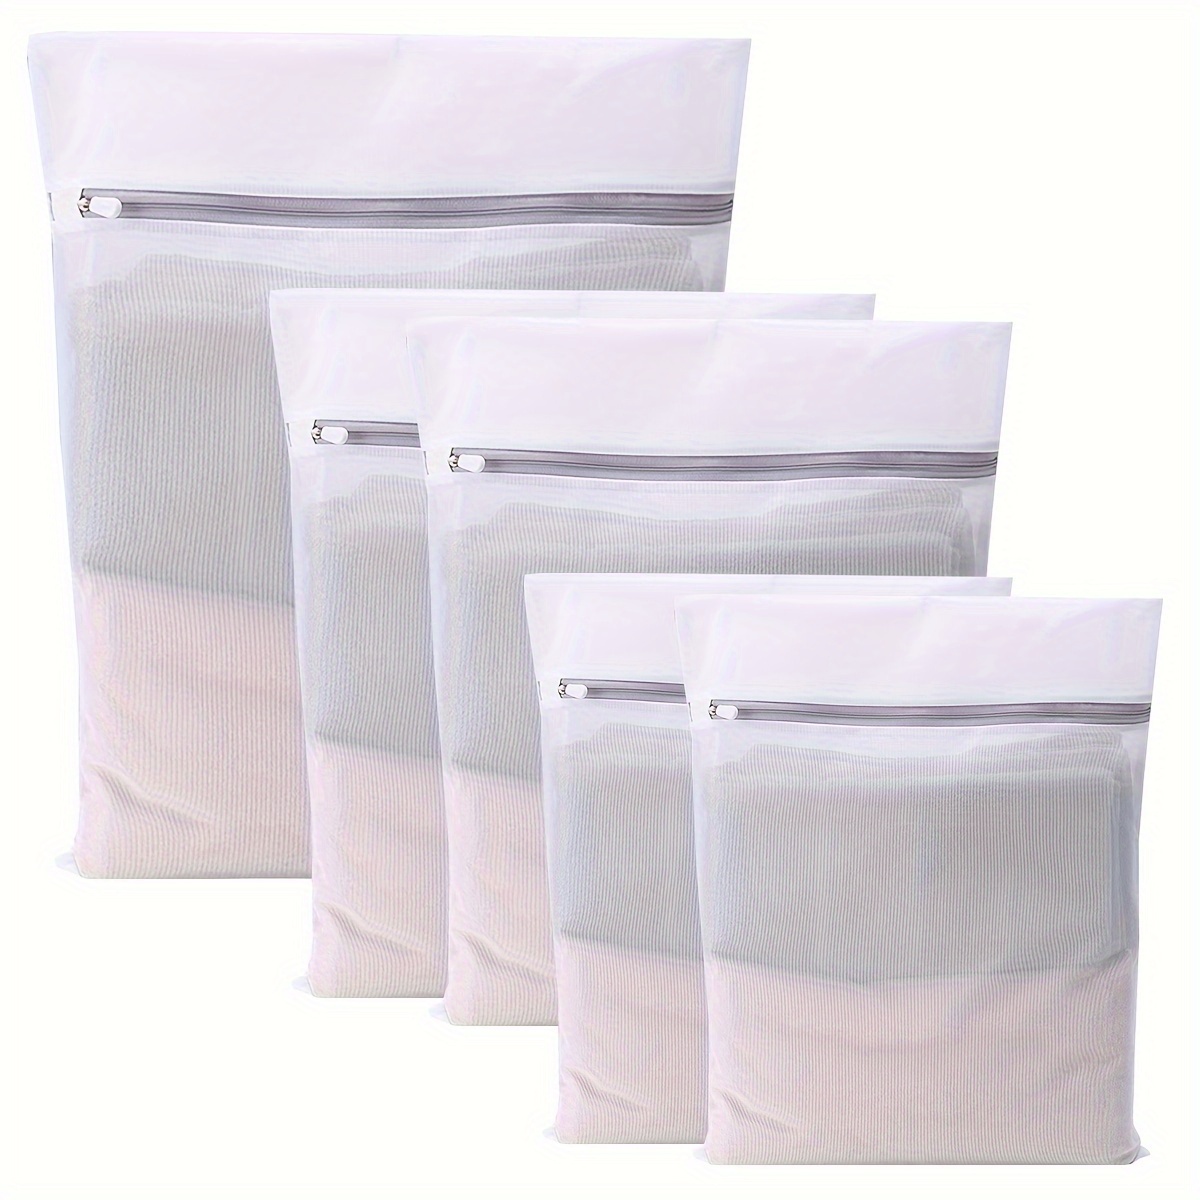 

1/2/3/5pcs Mesh Laundry Bag For Delicates, Suitable For Delicate Clothes, Washing Machine Washing Bag, Suitable For Underwear, Bra, Socks, Underwear, Clothing, Travel Storage Bag